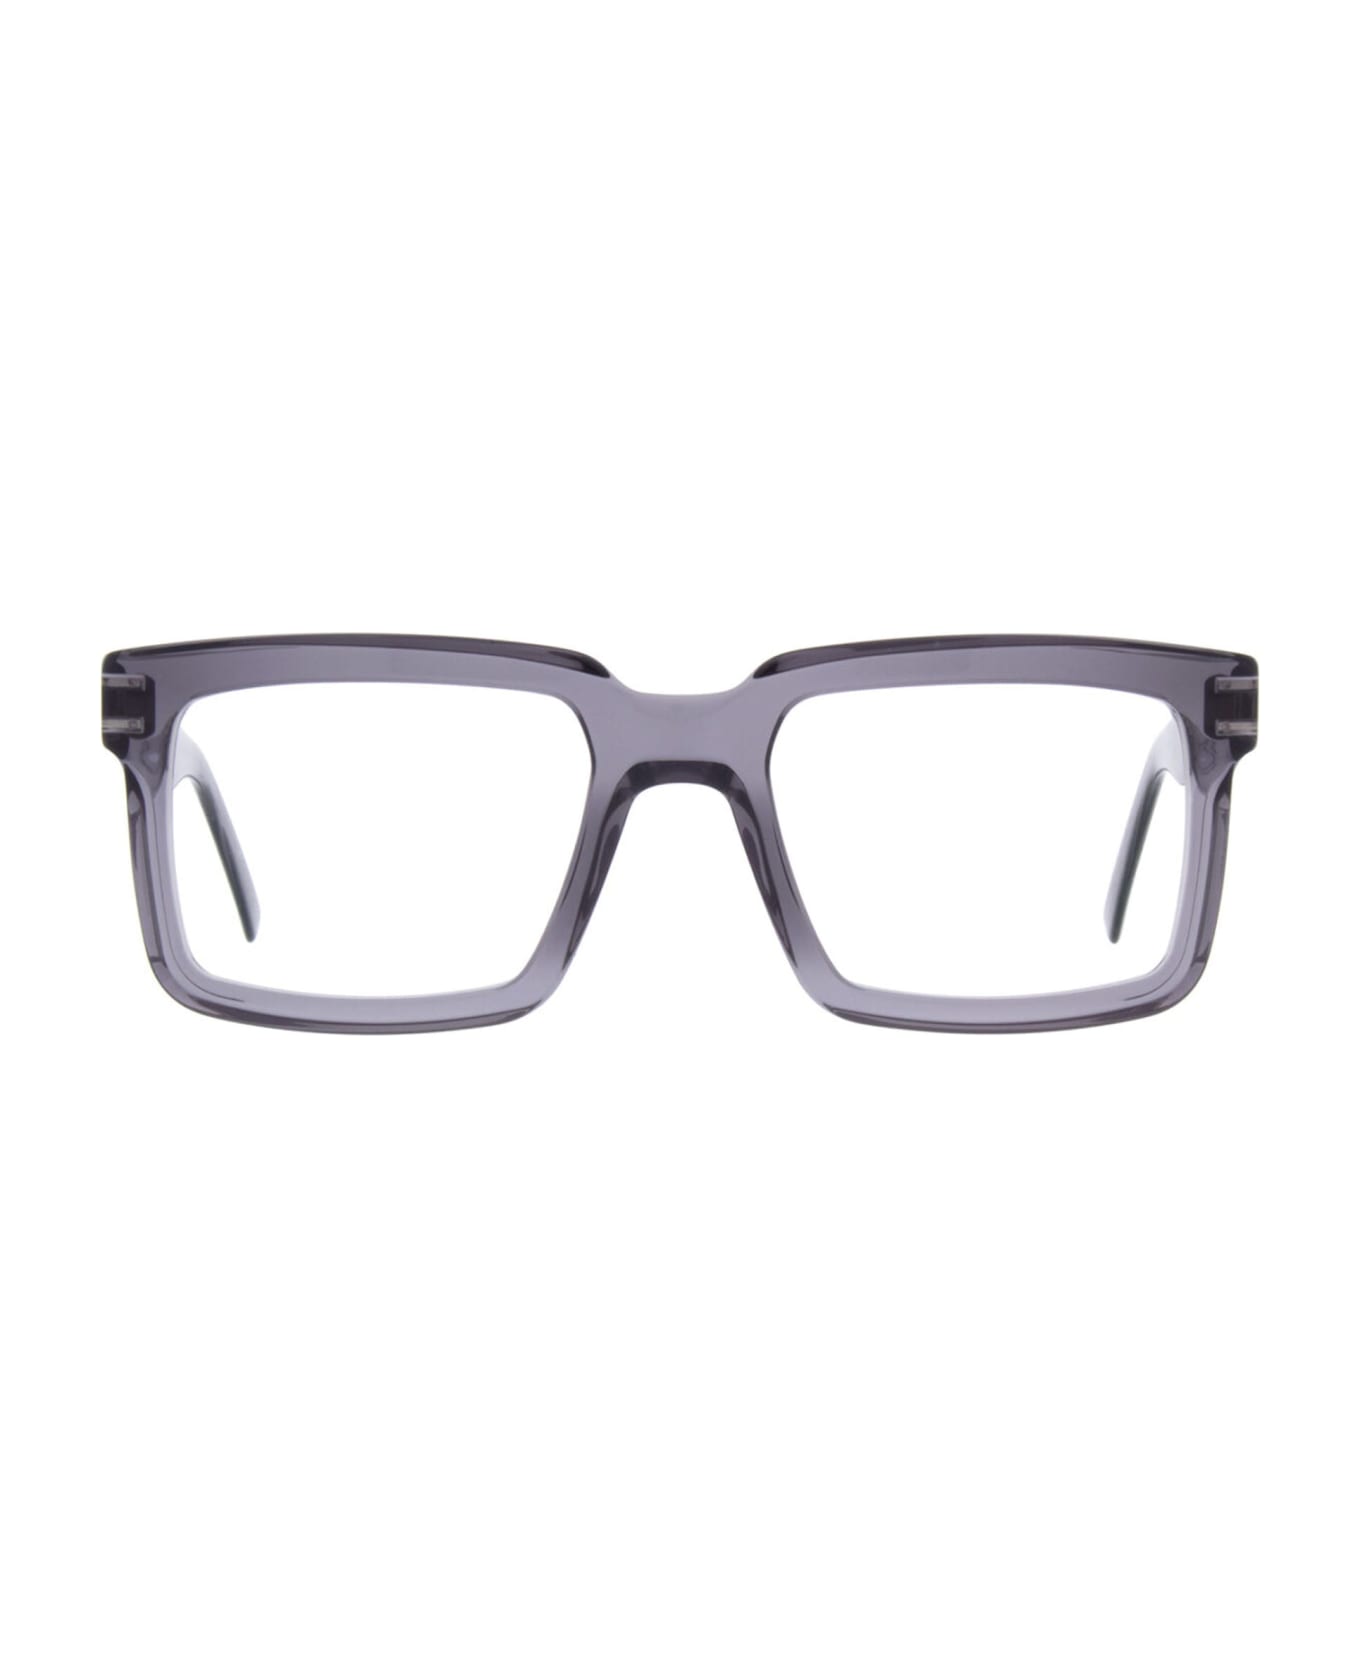 Andy Wolf Aw05 - Grey Glasses - grey